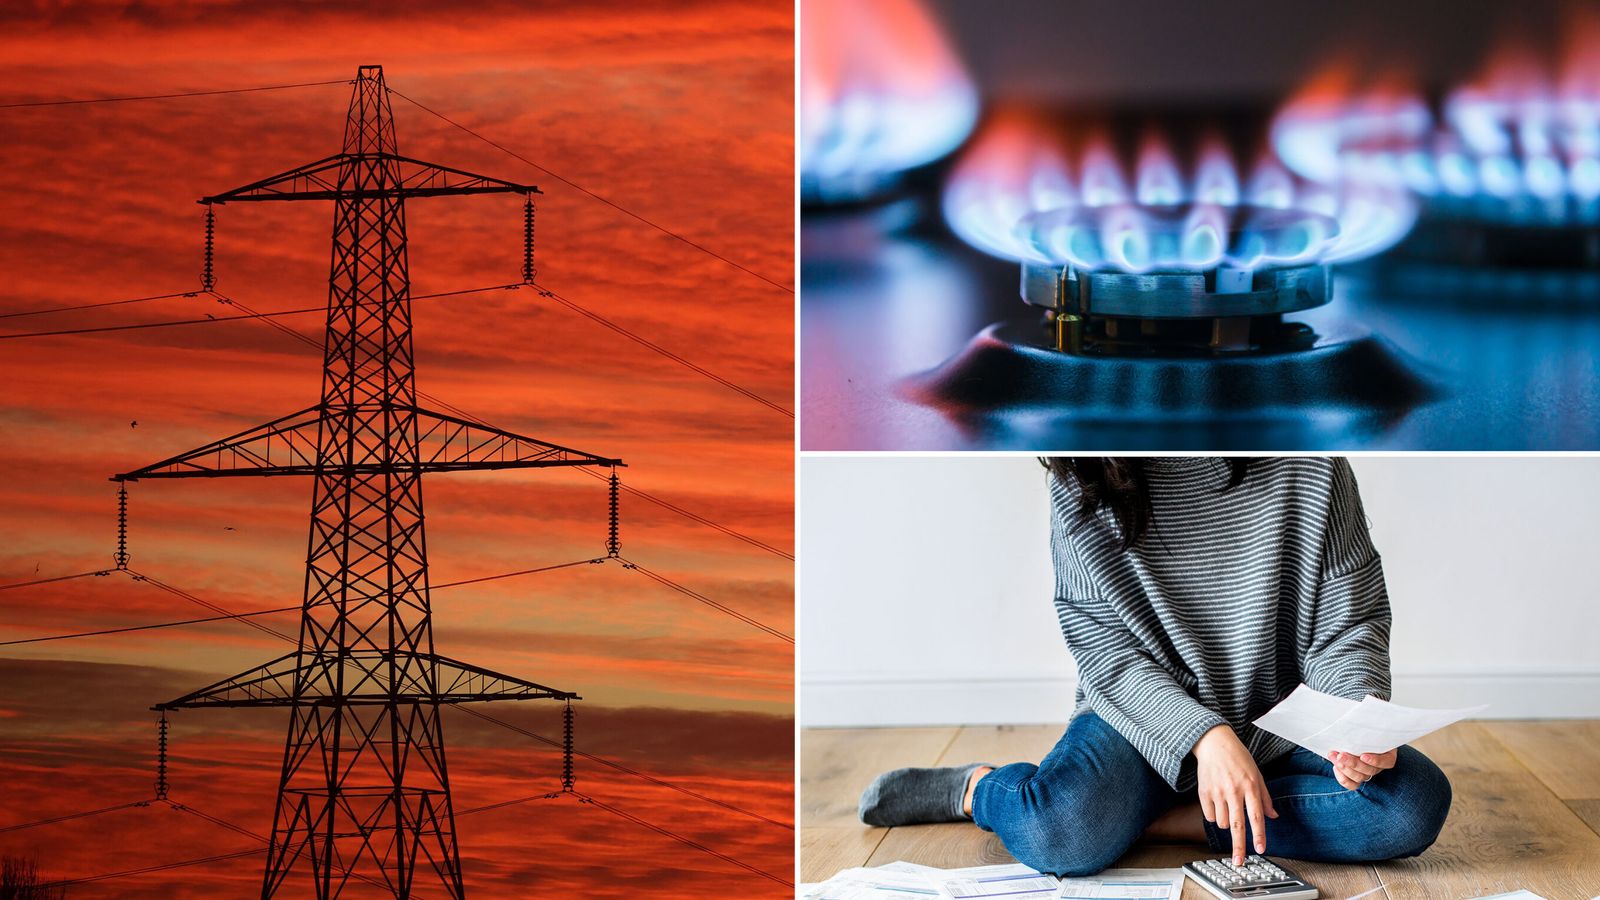 Minister issues warning as government energy support package kicks in to cover huge spike in bills